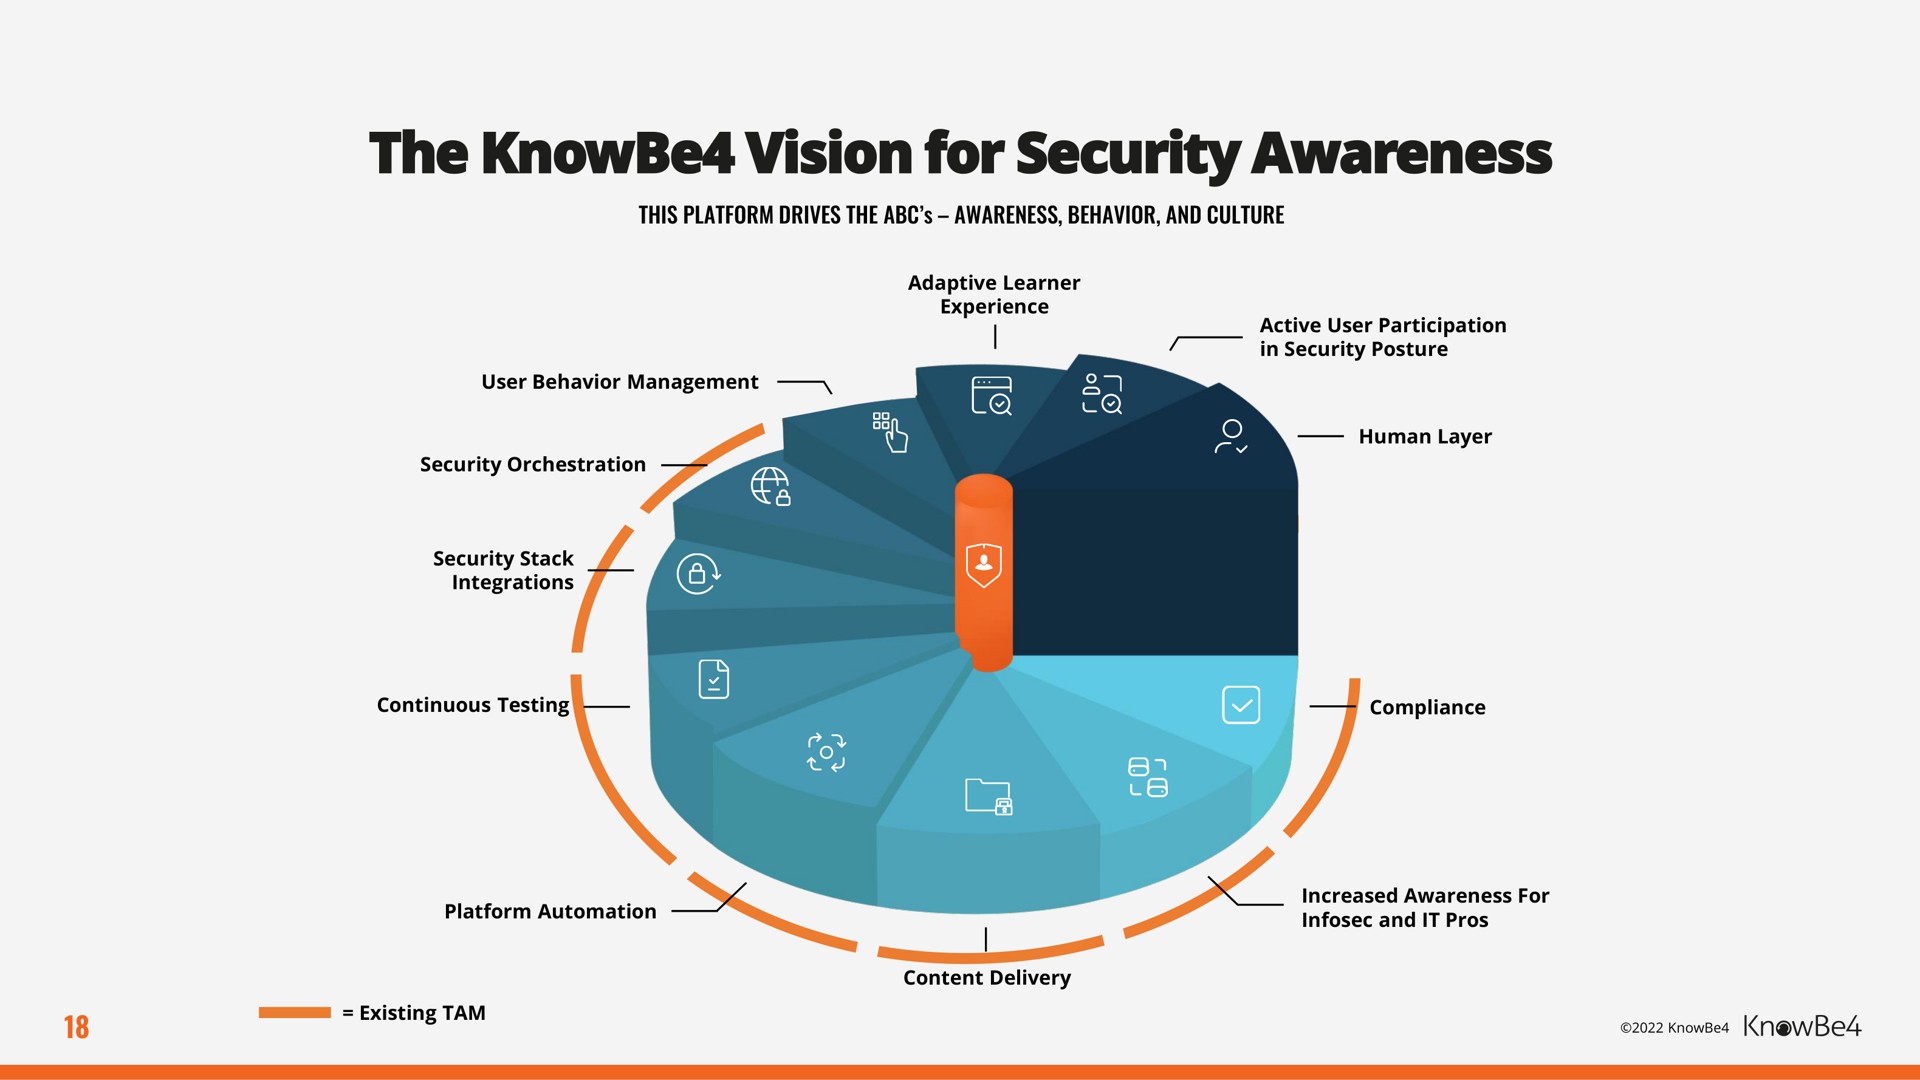 the vision for security awareness | KnowBe4